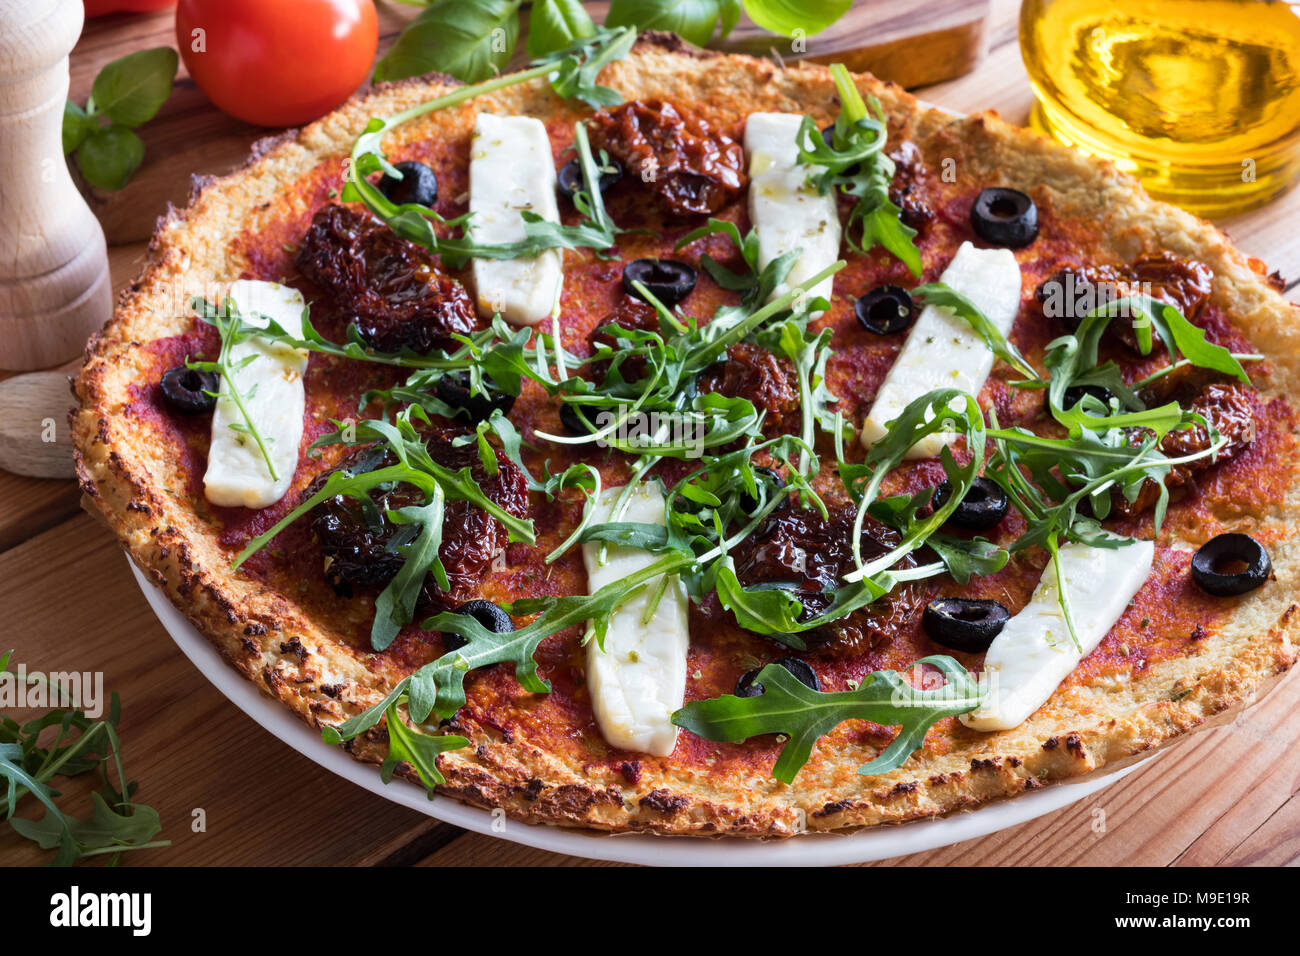 Gluten-free grain-free vegetarian pizza made from mashed cauliflower and almond flour, topped with sundried tomatoes, olives, goat cheese and fresh ar Stock Photo